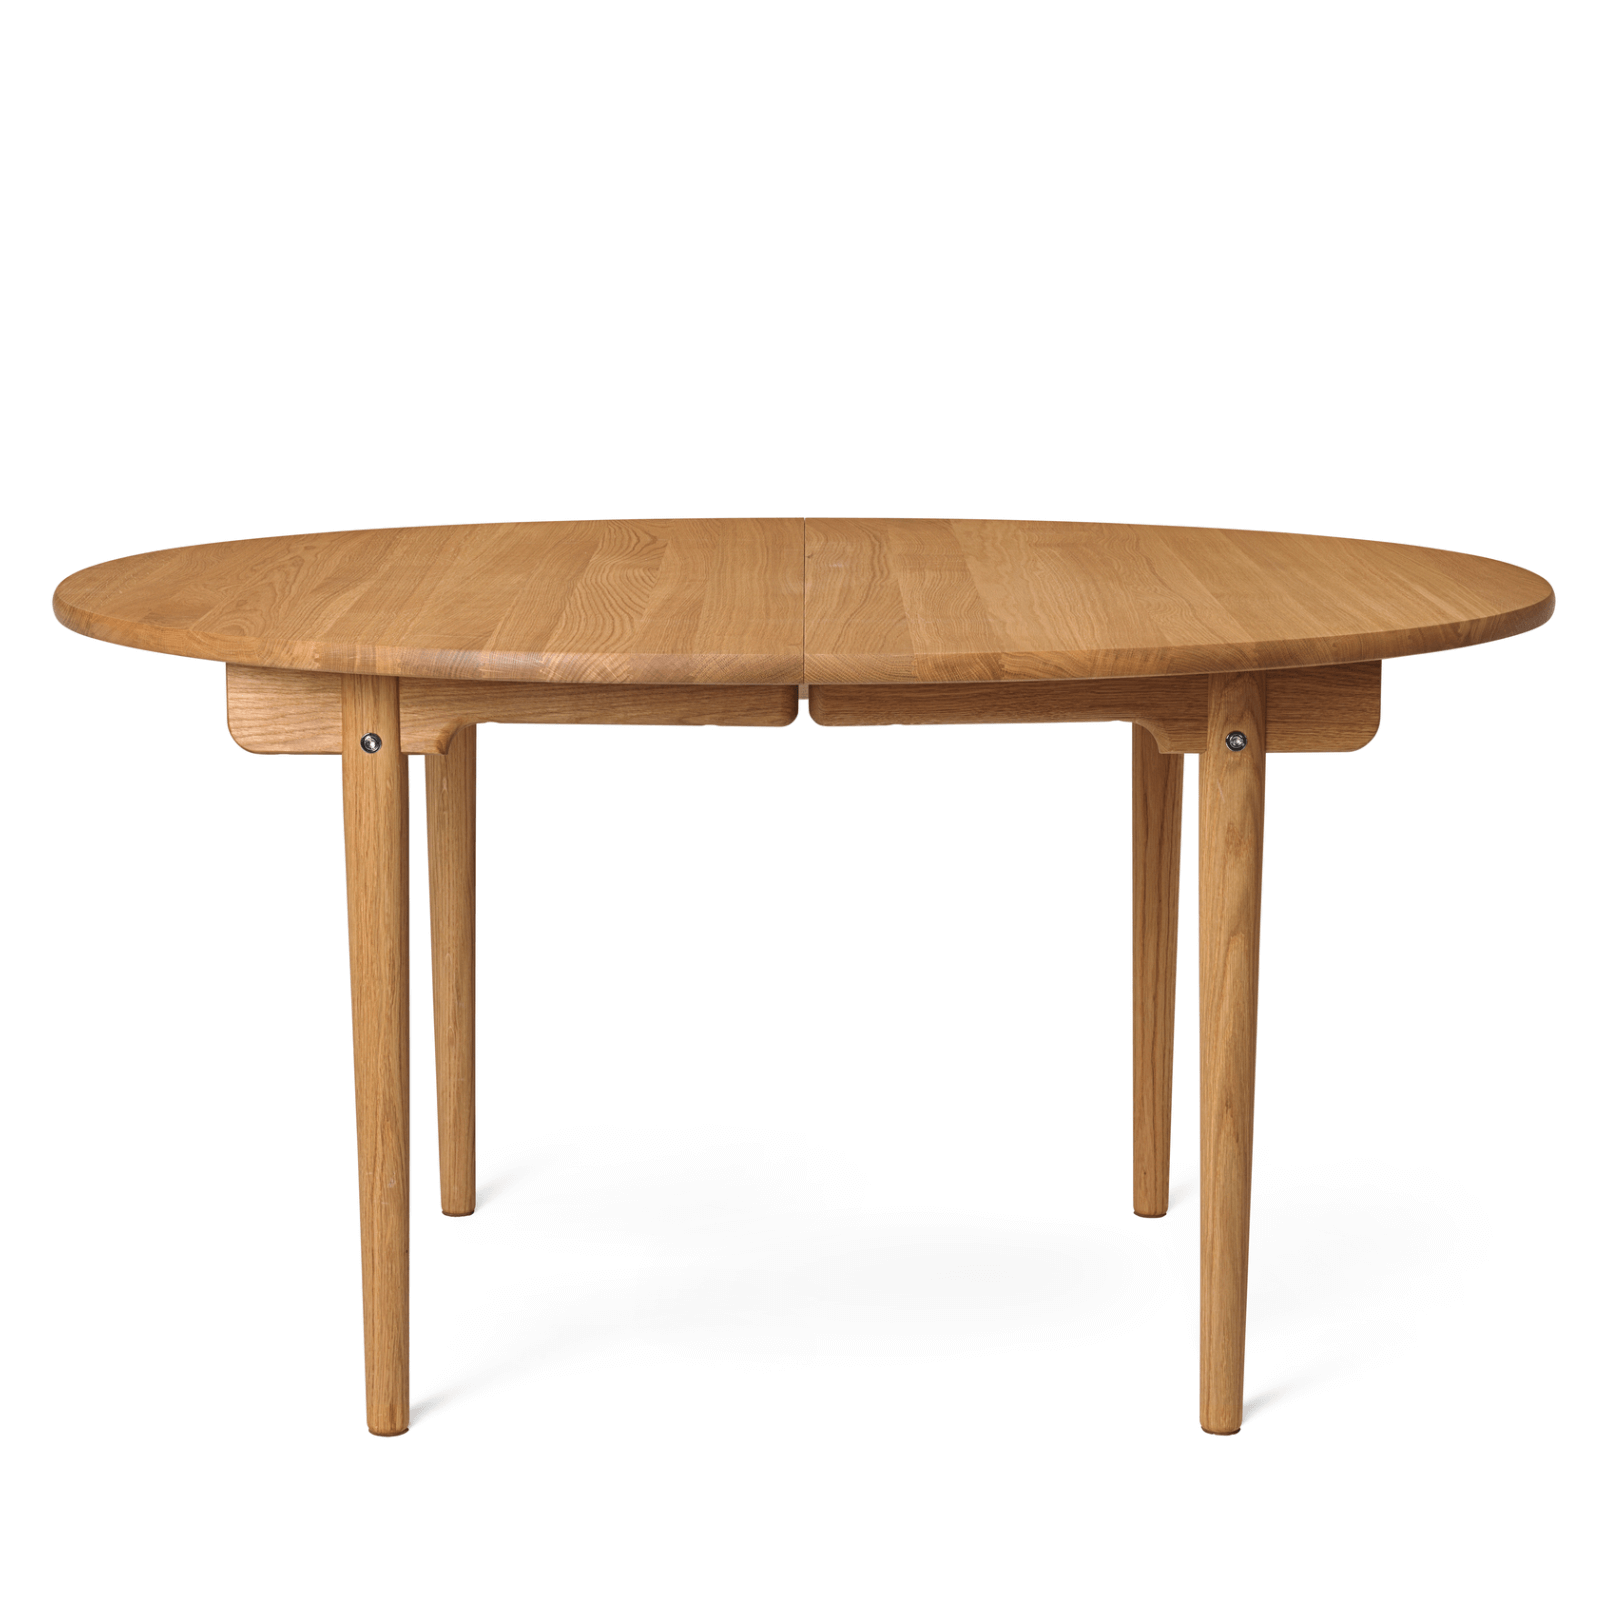 Carl Hansen Son Ch337 Dining Table Beech Lacquer No Extension Designer Furniture From Holloways Of Ludlow